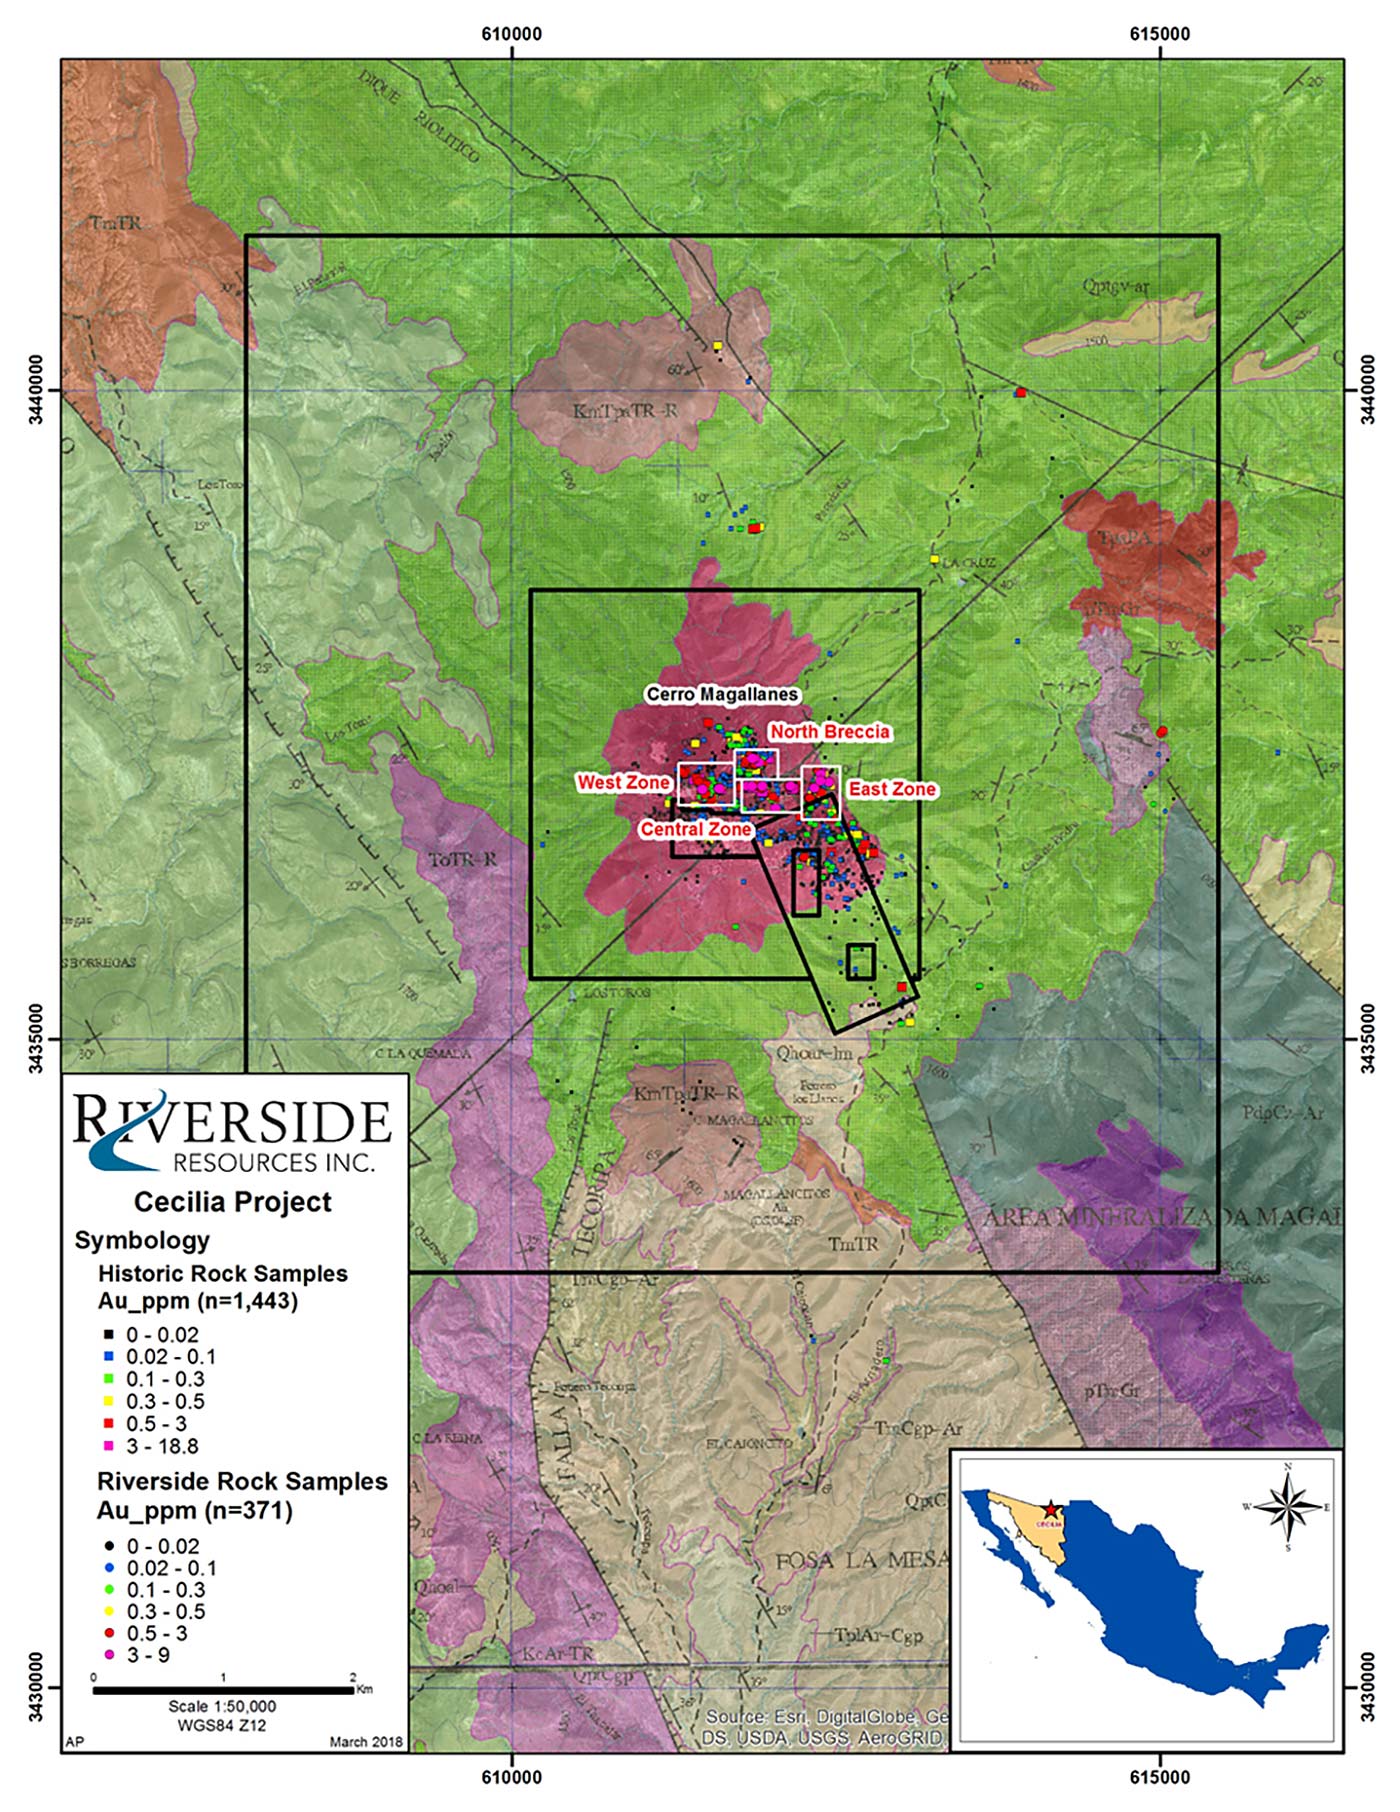 In March of 2018, Riverside was granted the mineral rights to the Cecilia 1 concession, which had been applied for in November of 2017. Obtaining the Cecilia 1 claim significantly increases the total area covered by Riverside’s Cecilia Gold Project. The expanded project area now covers approximately 6,000 hectares, about 6.7 times greater than the original area of the Project.